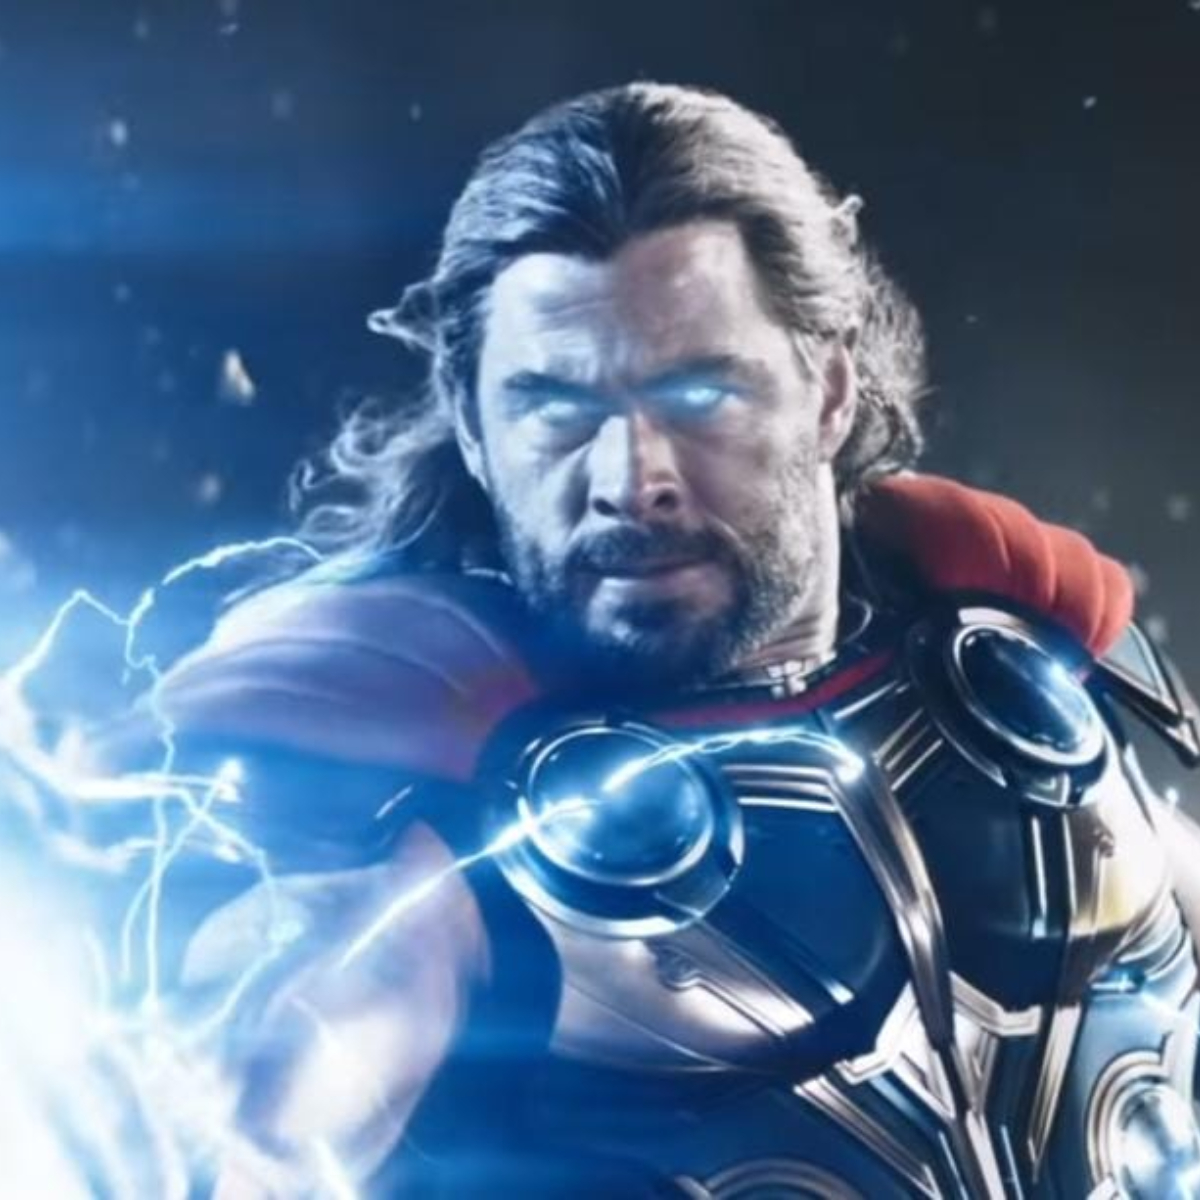 Thor Love And Thunder Box Office: Chris Hemsworth starrer slides further on Tuesday after solid weekend